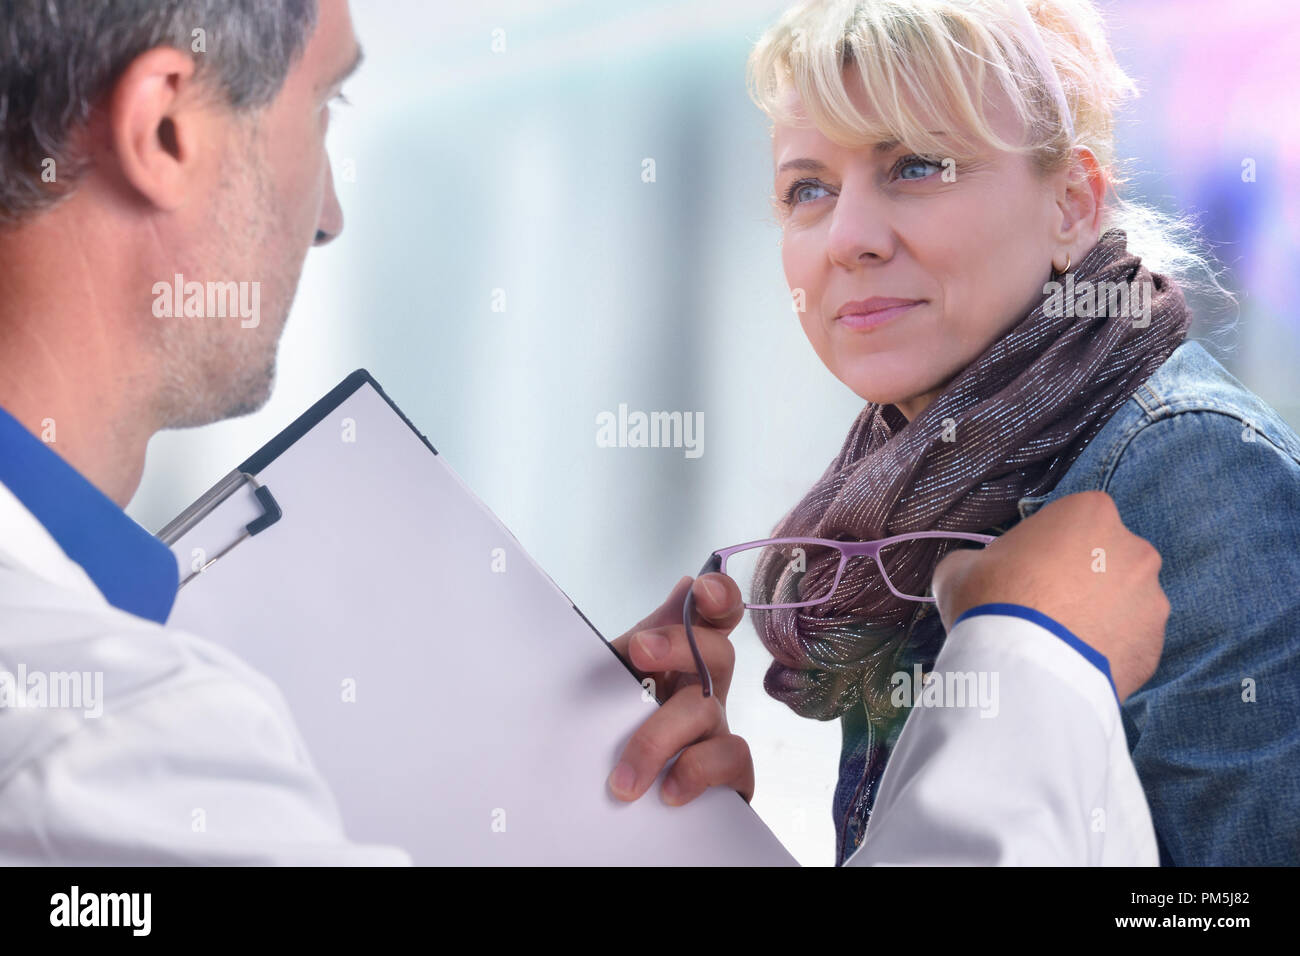 Optometrist showing a glasses to a woman. Horizontal composition. Stock Photo